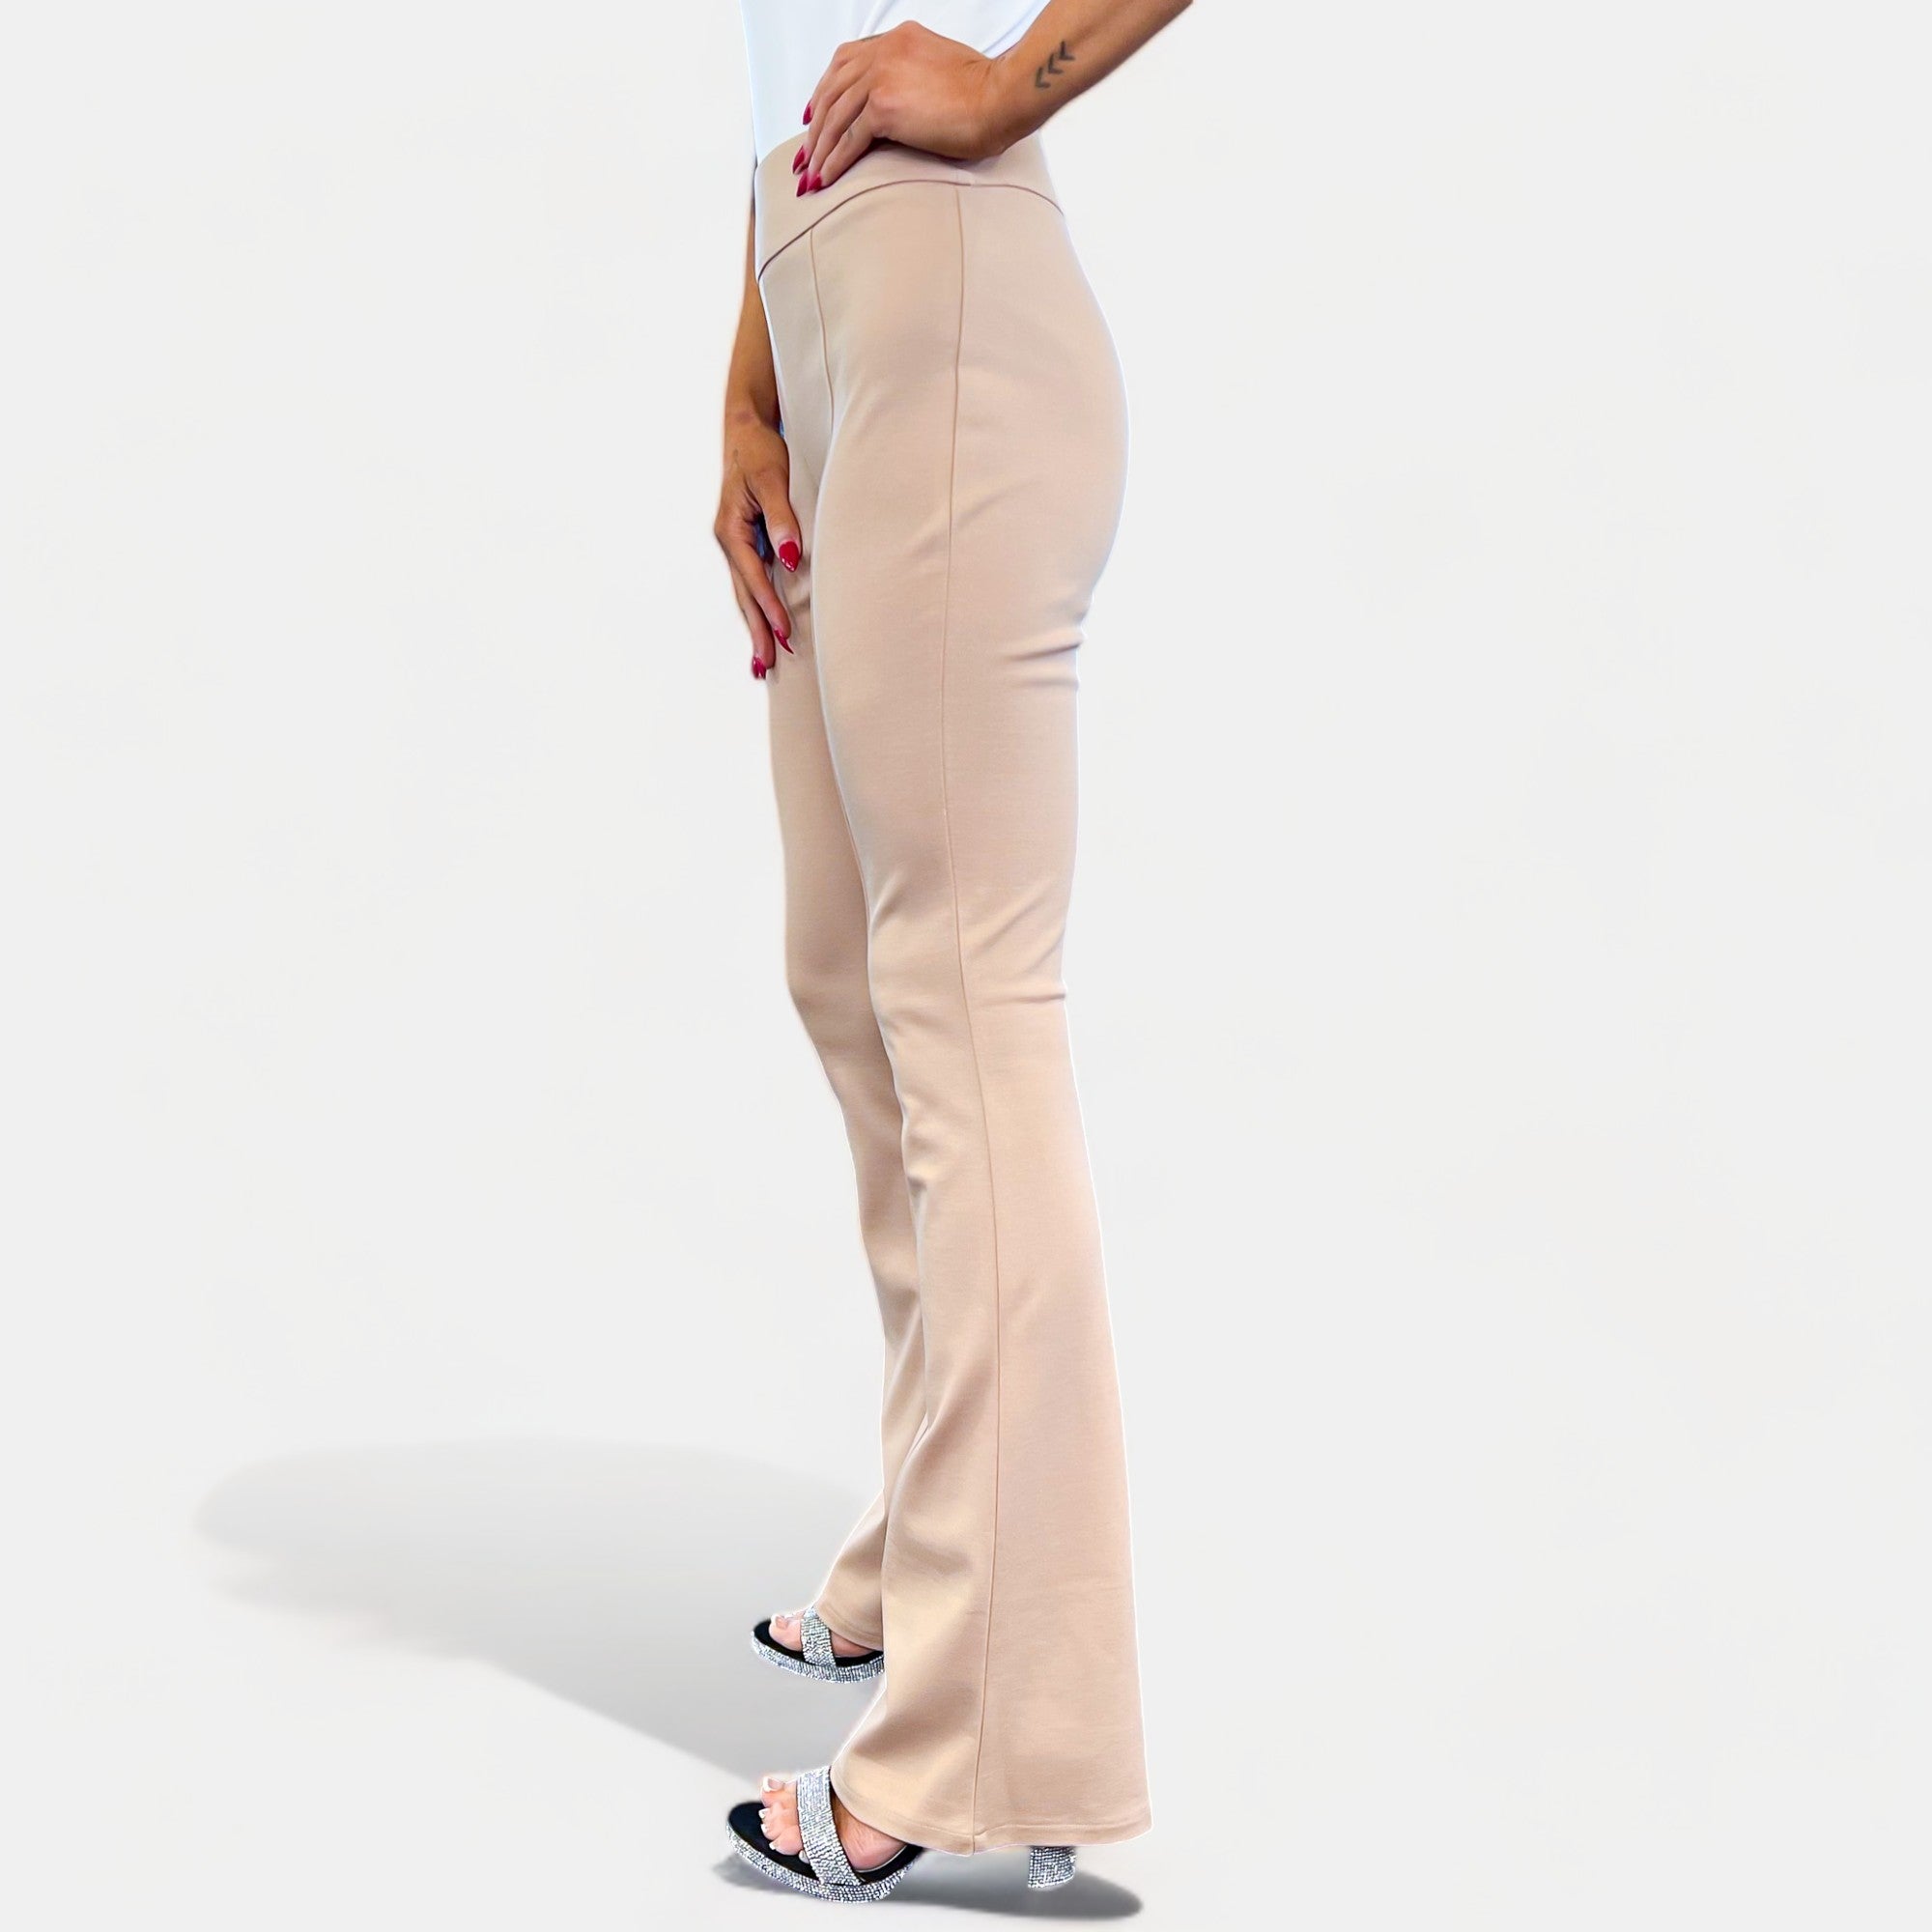 Strawberry High Waisted Flare Pants – The ZigZag Stripe